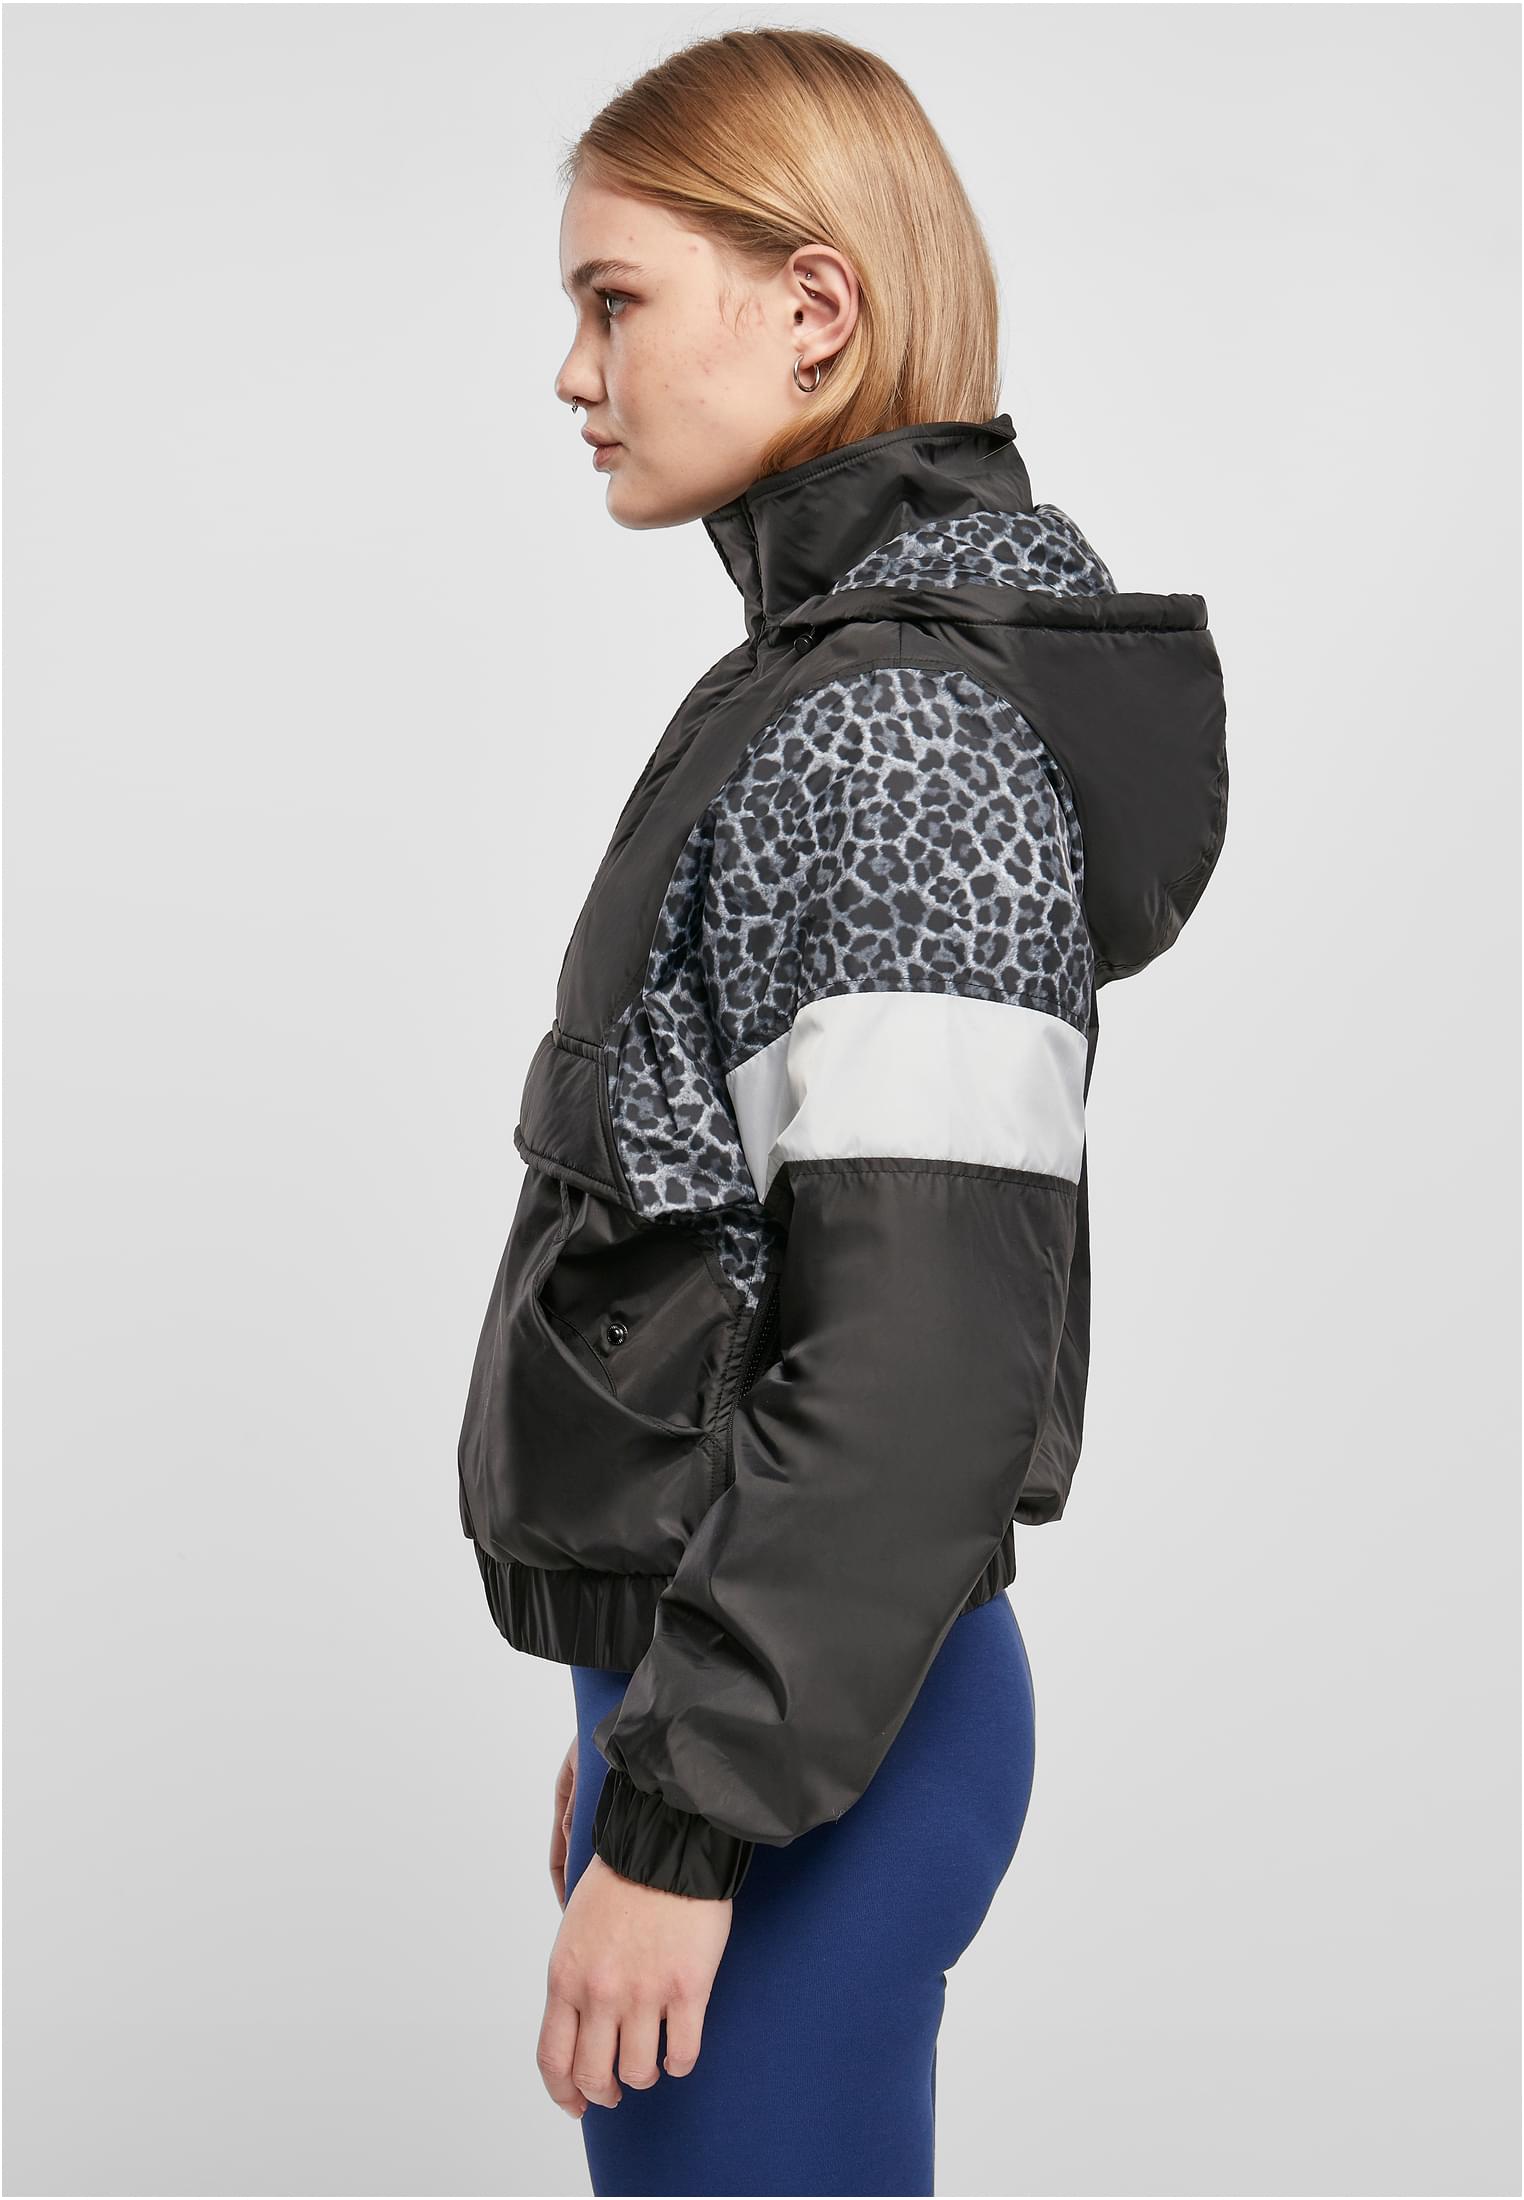 Ladies Jacket-TB3063 Pull Over AOP Mixed